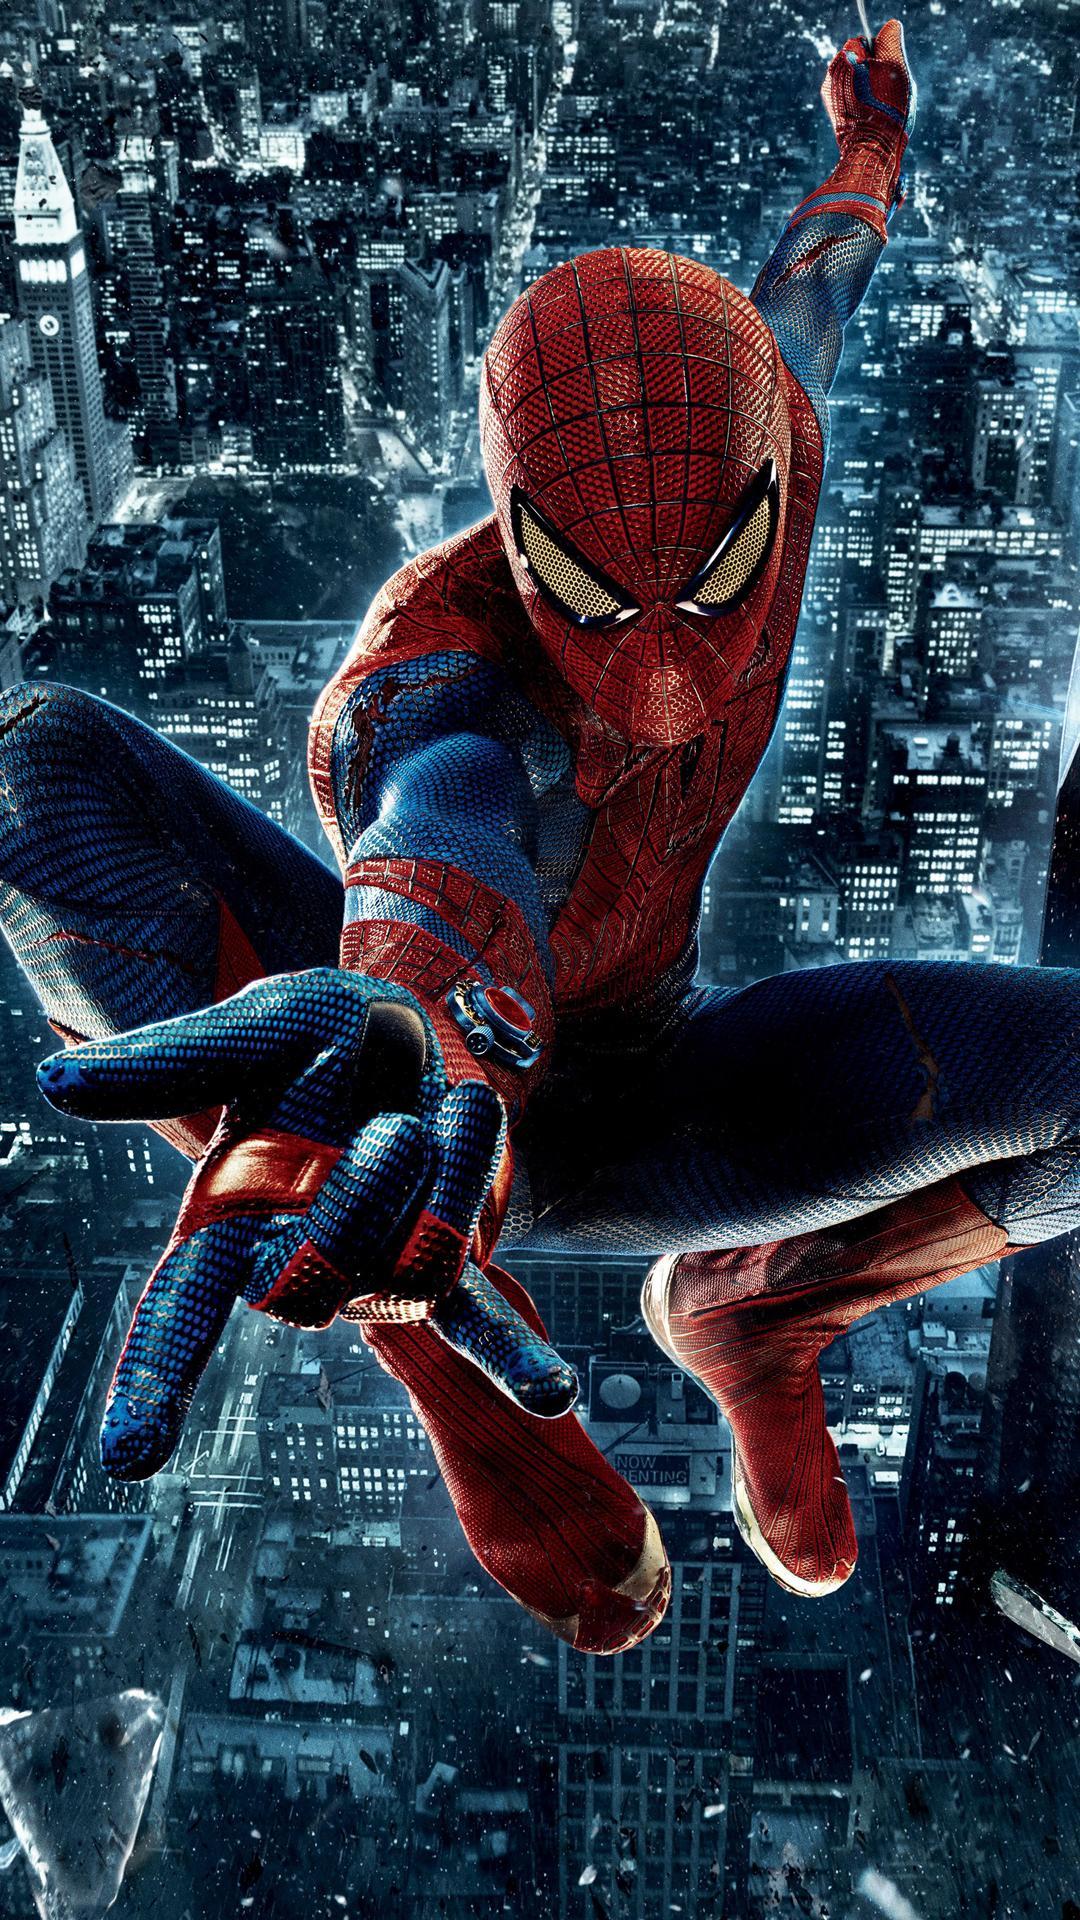 Spiderman htc one wallpaper, free and easy to download